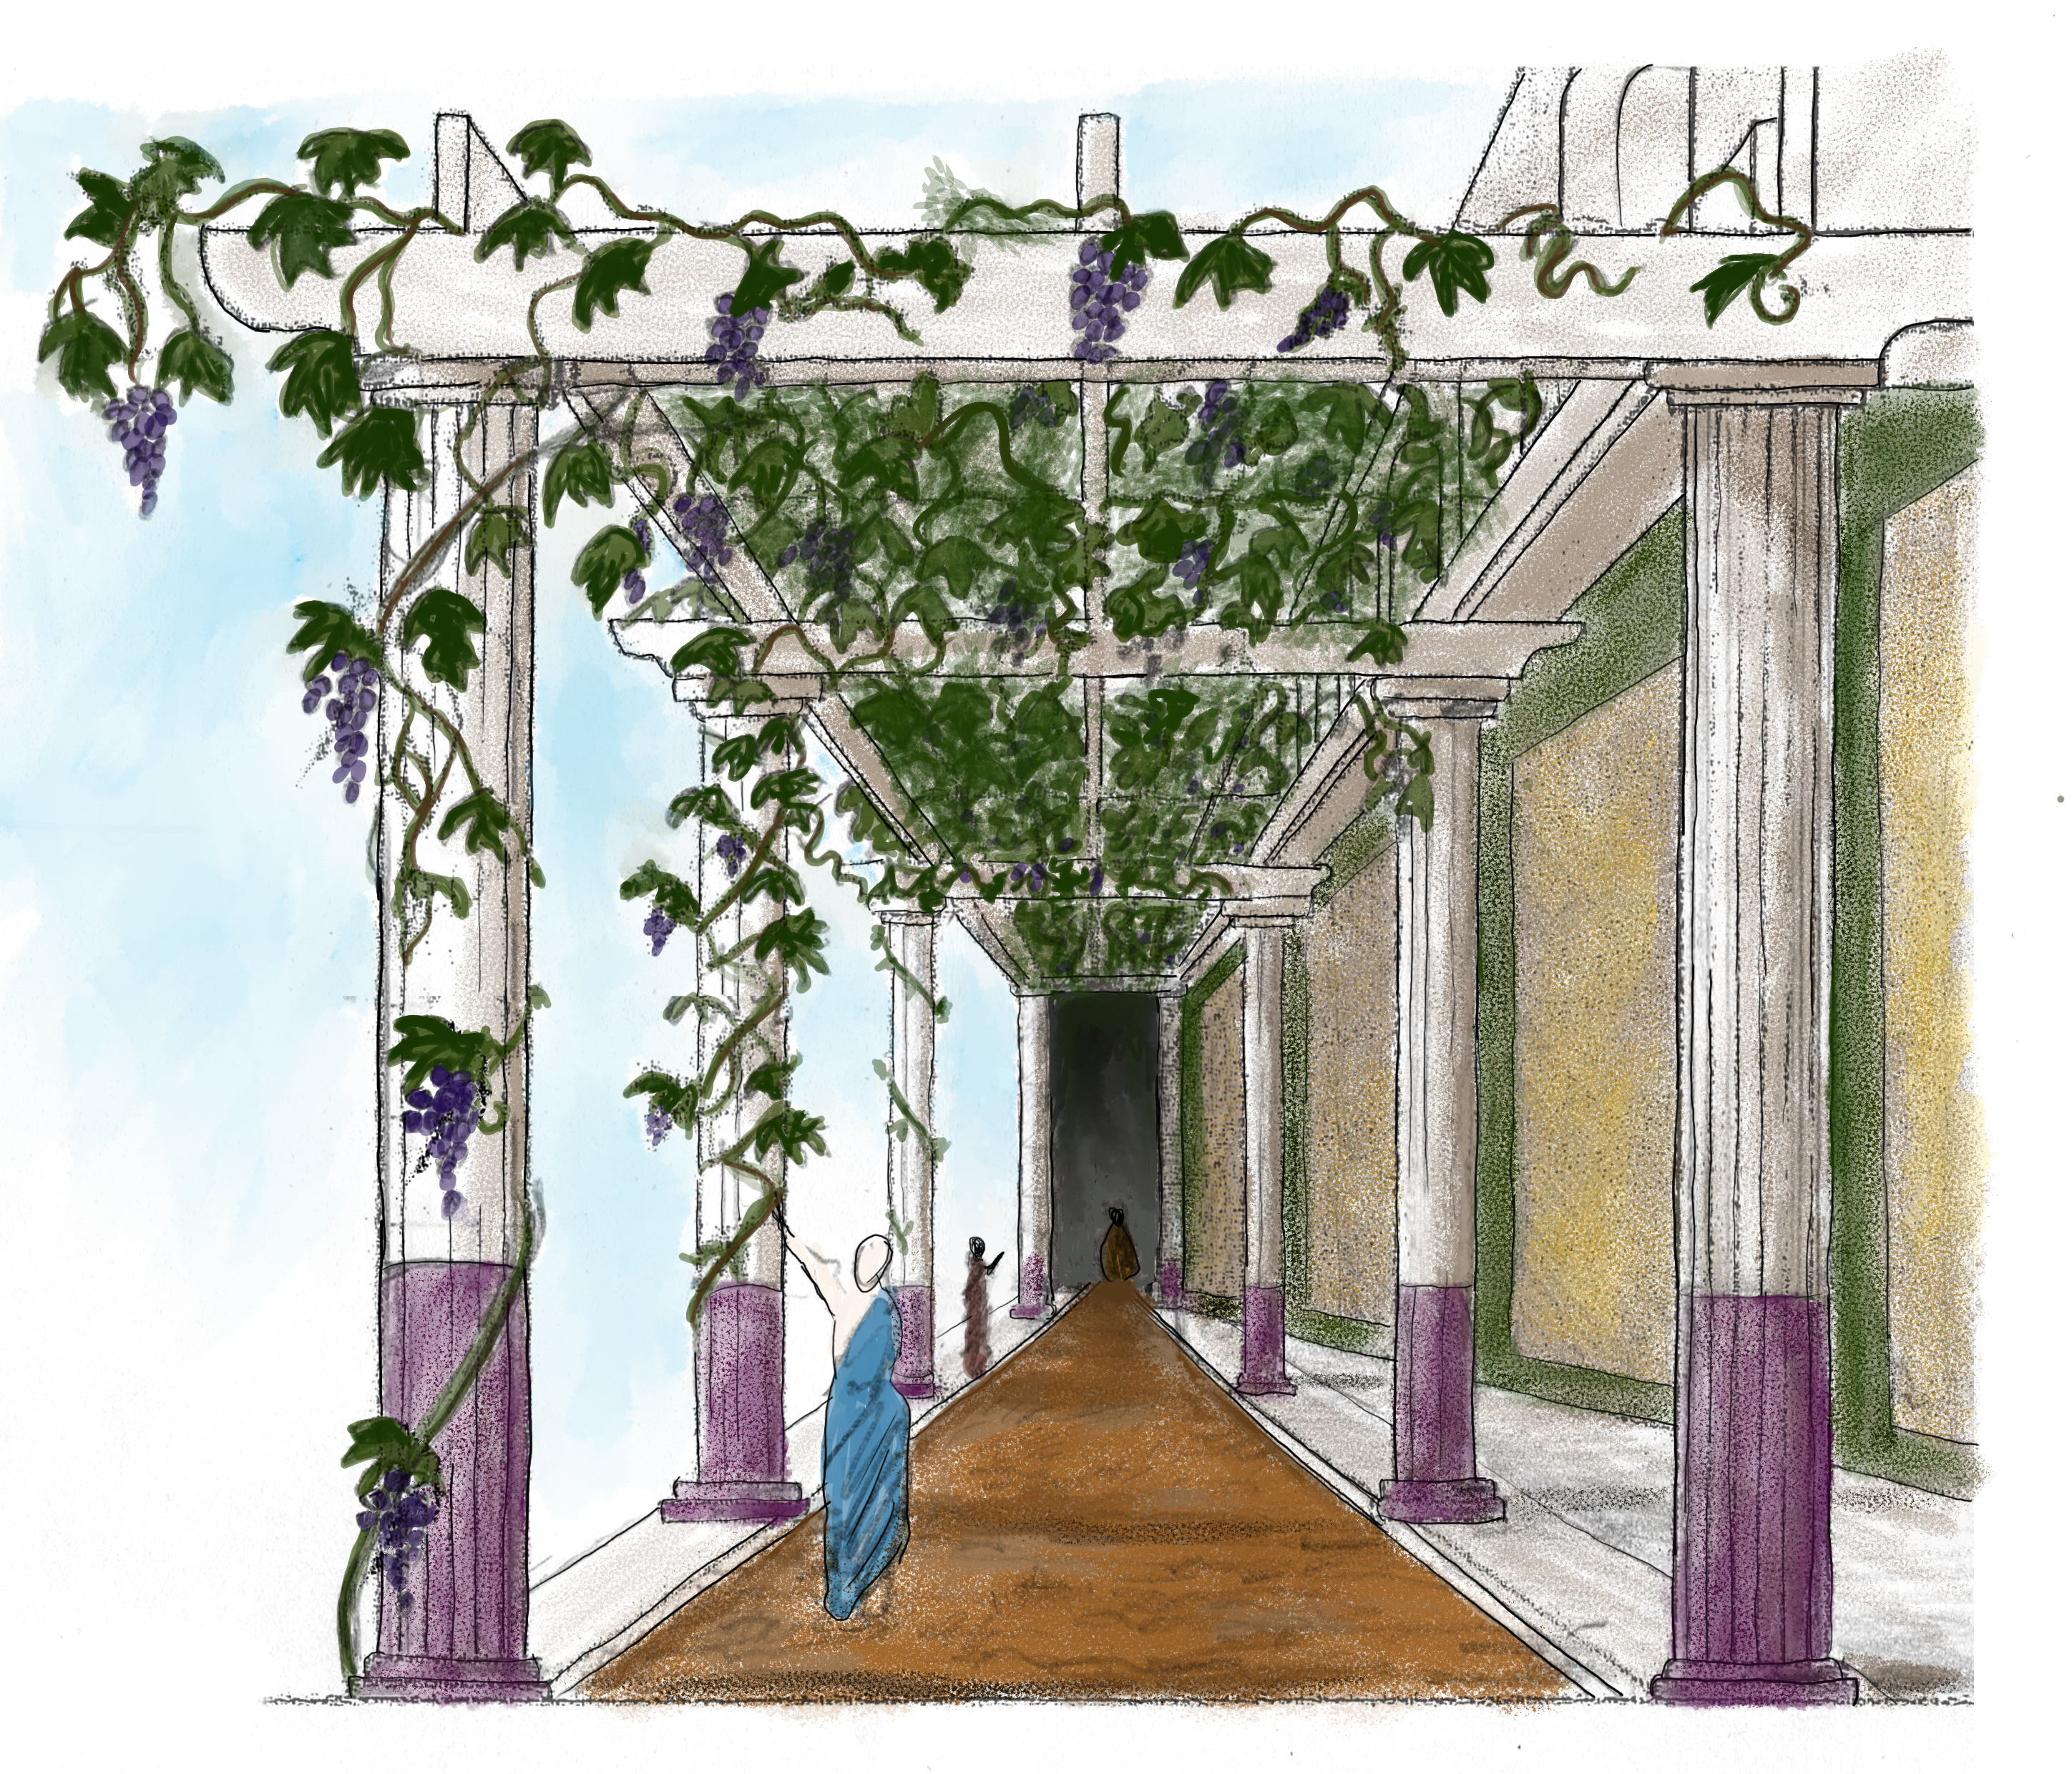 Reconstruction section of the trellised walkway and two-story colonnade of the Porticus Liviae